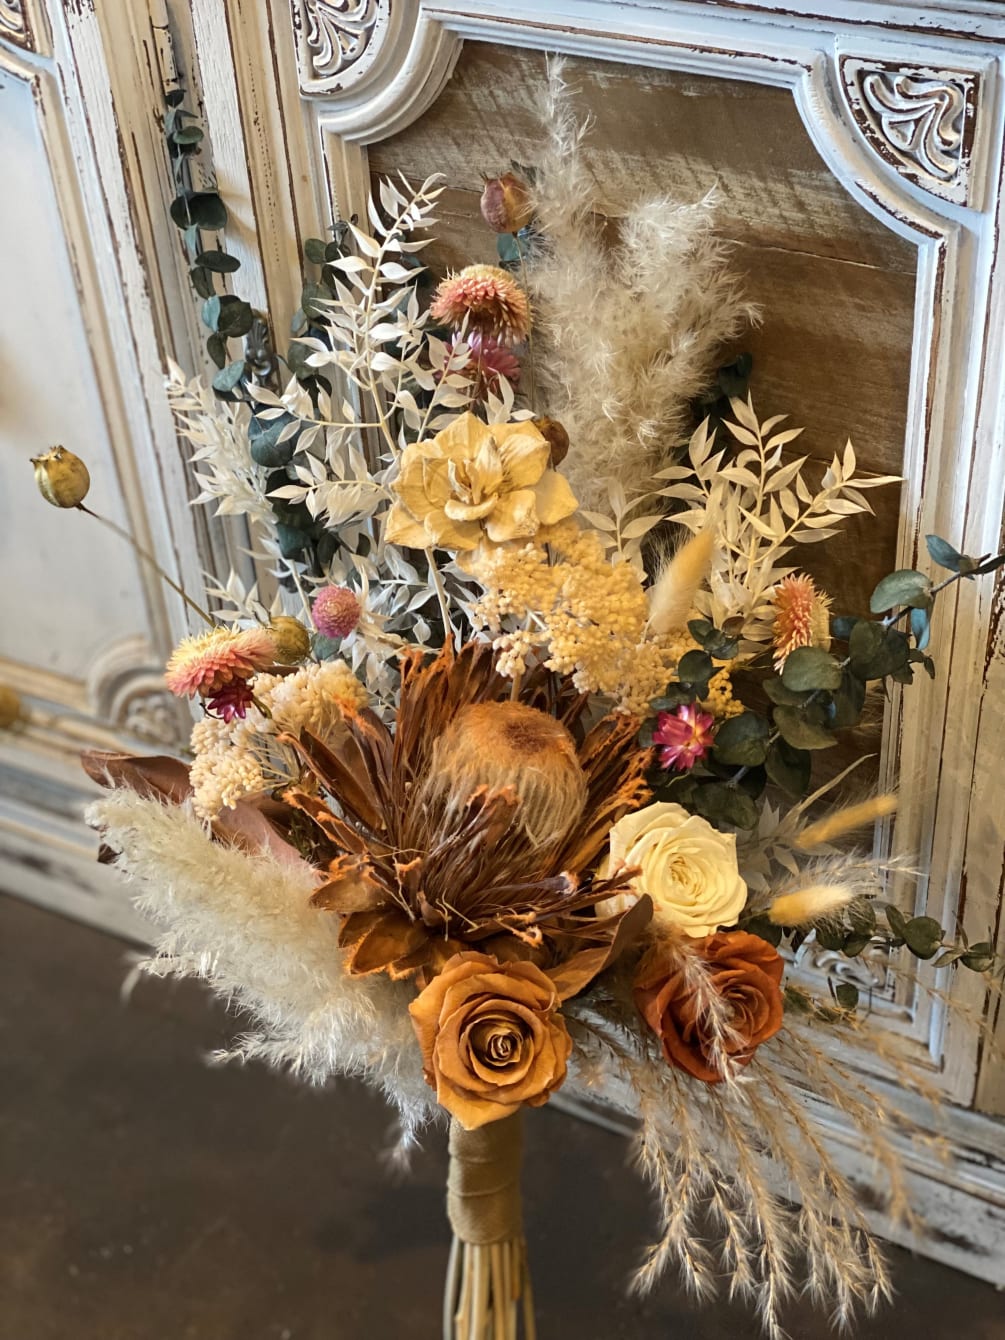 A beautiful and unique bouquet with a mix of lovely dried flowers